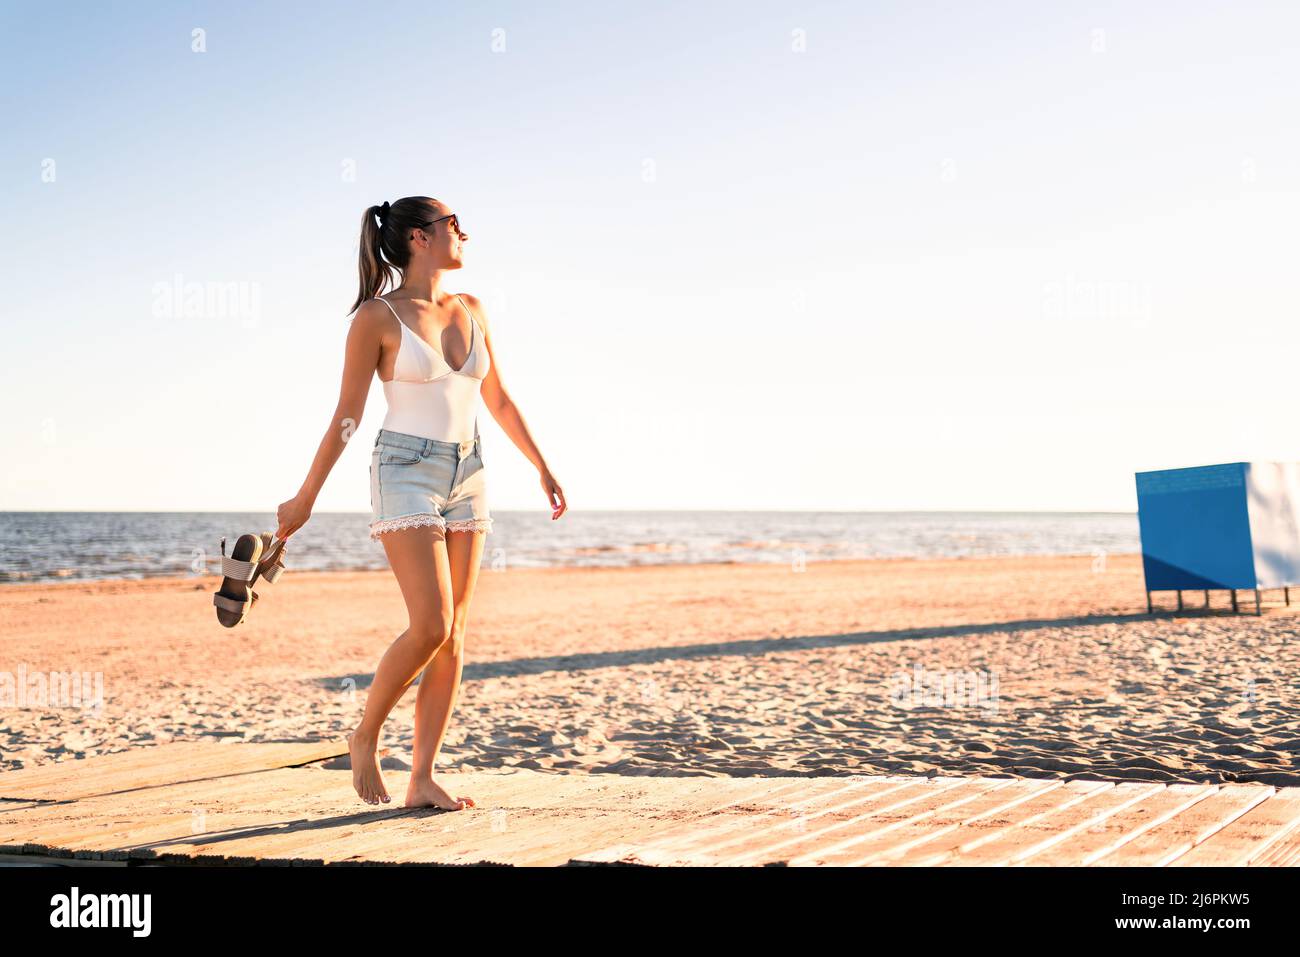 Dancing on the beach at sunset. Playful positive woman walking at sea shore. Summertime freedom, wellness and happy lifestyle. Seaside vacation fun. Stock Photo